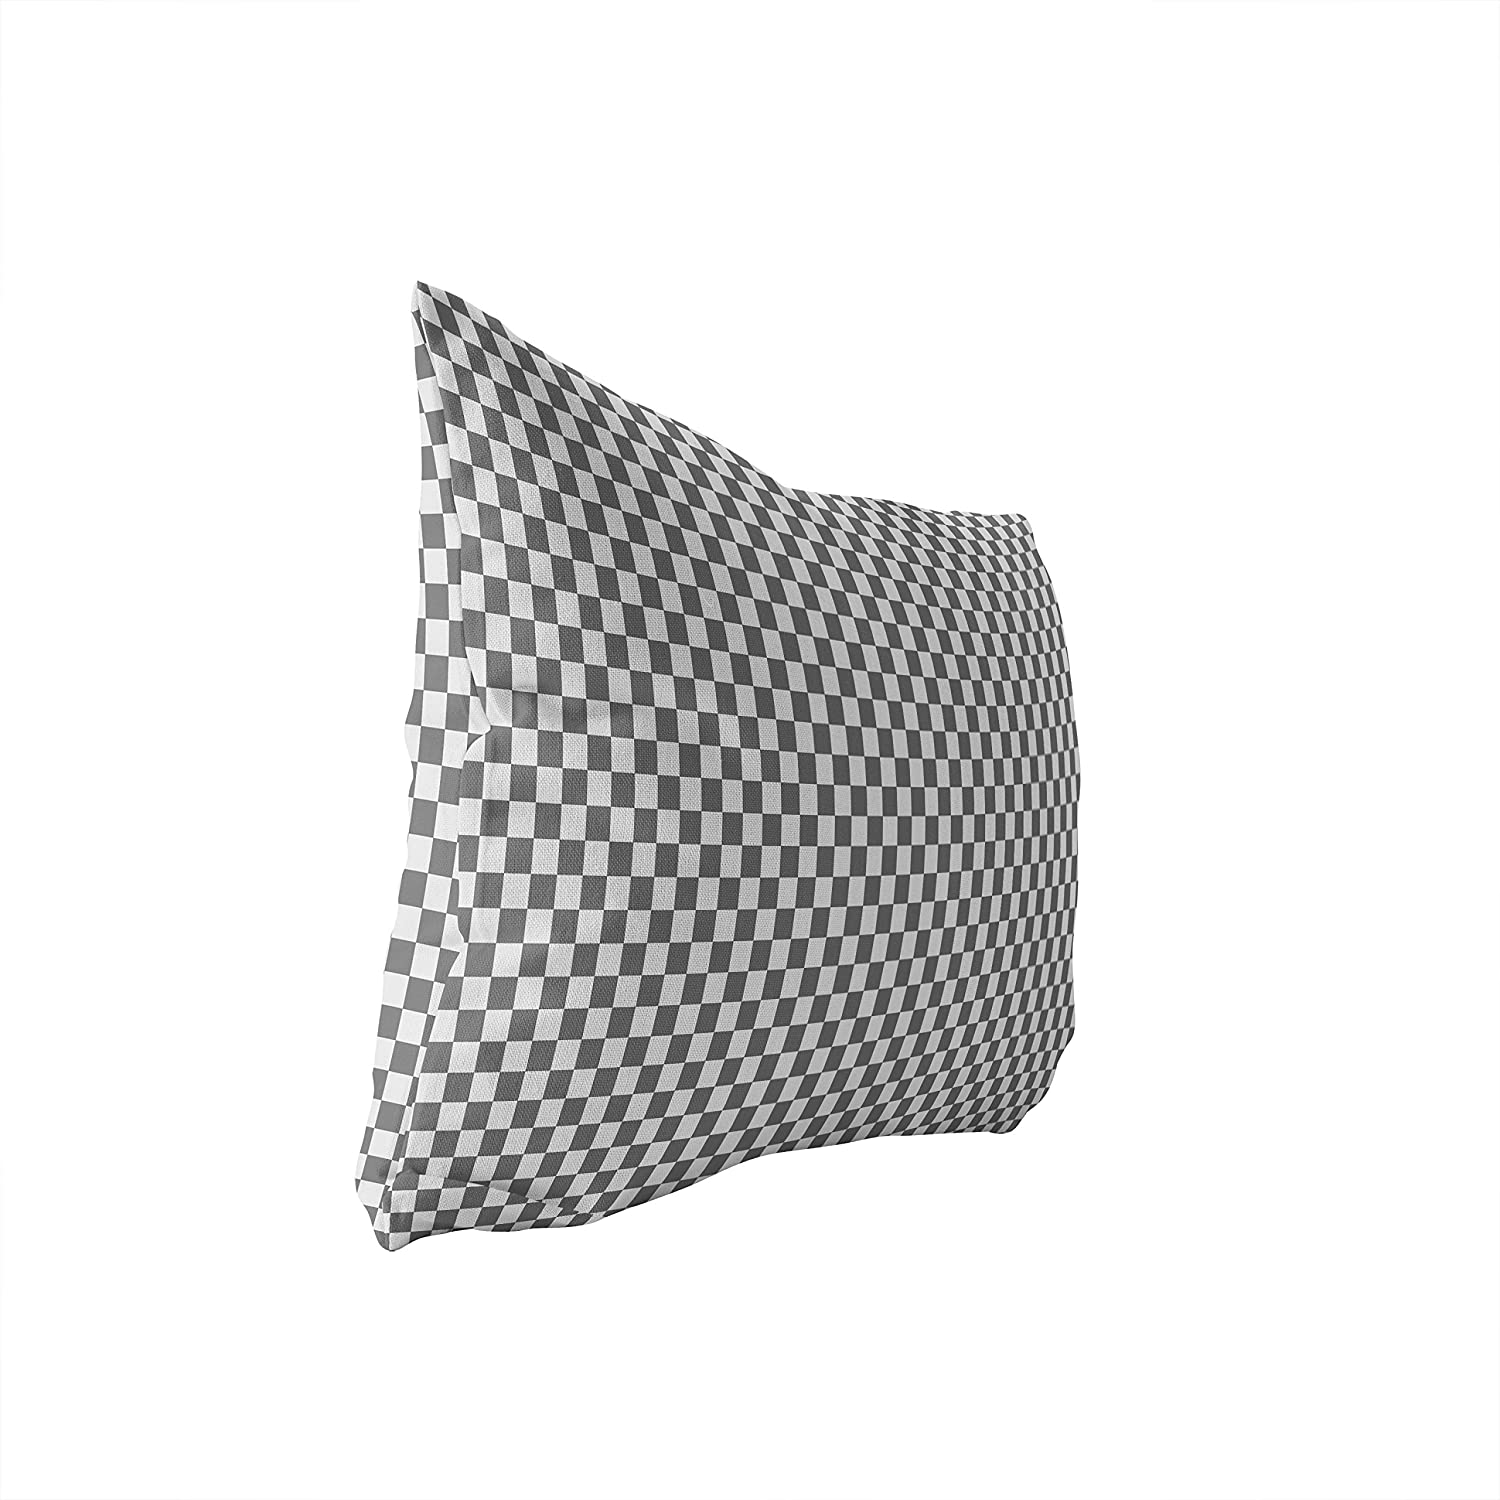 UKN Checker Board Charcoal Lumbar Pillow Grey Geometric Modern Contemporary Polyester Single Removable Cover